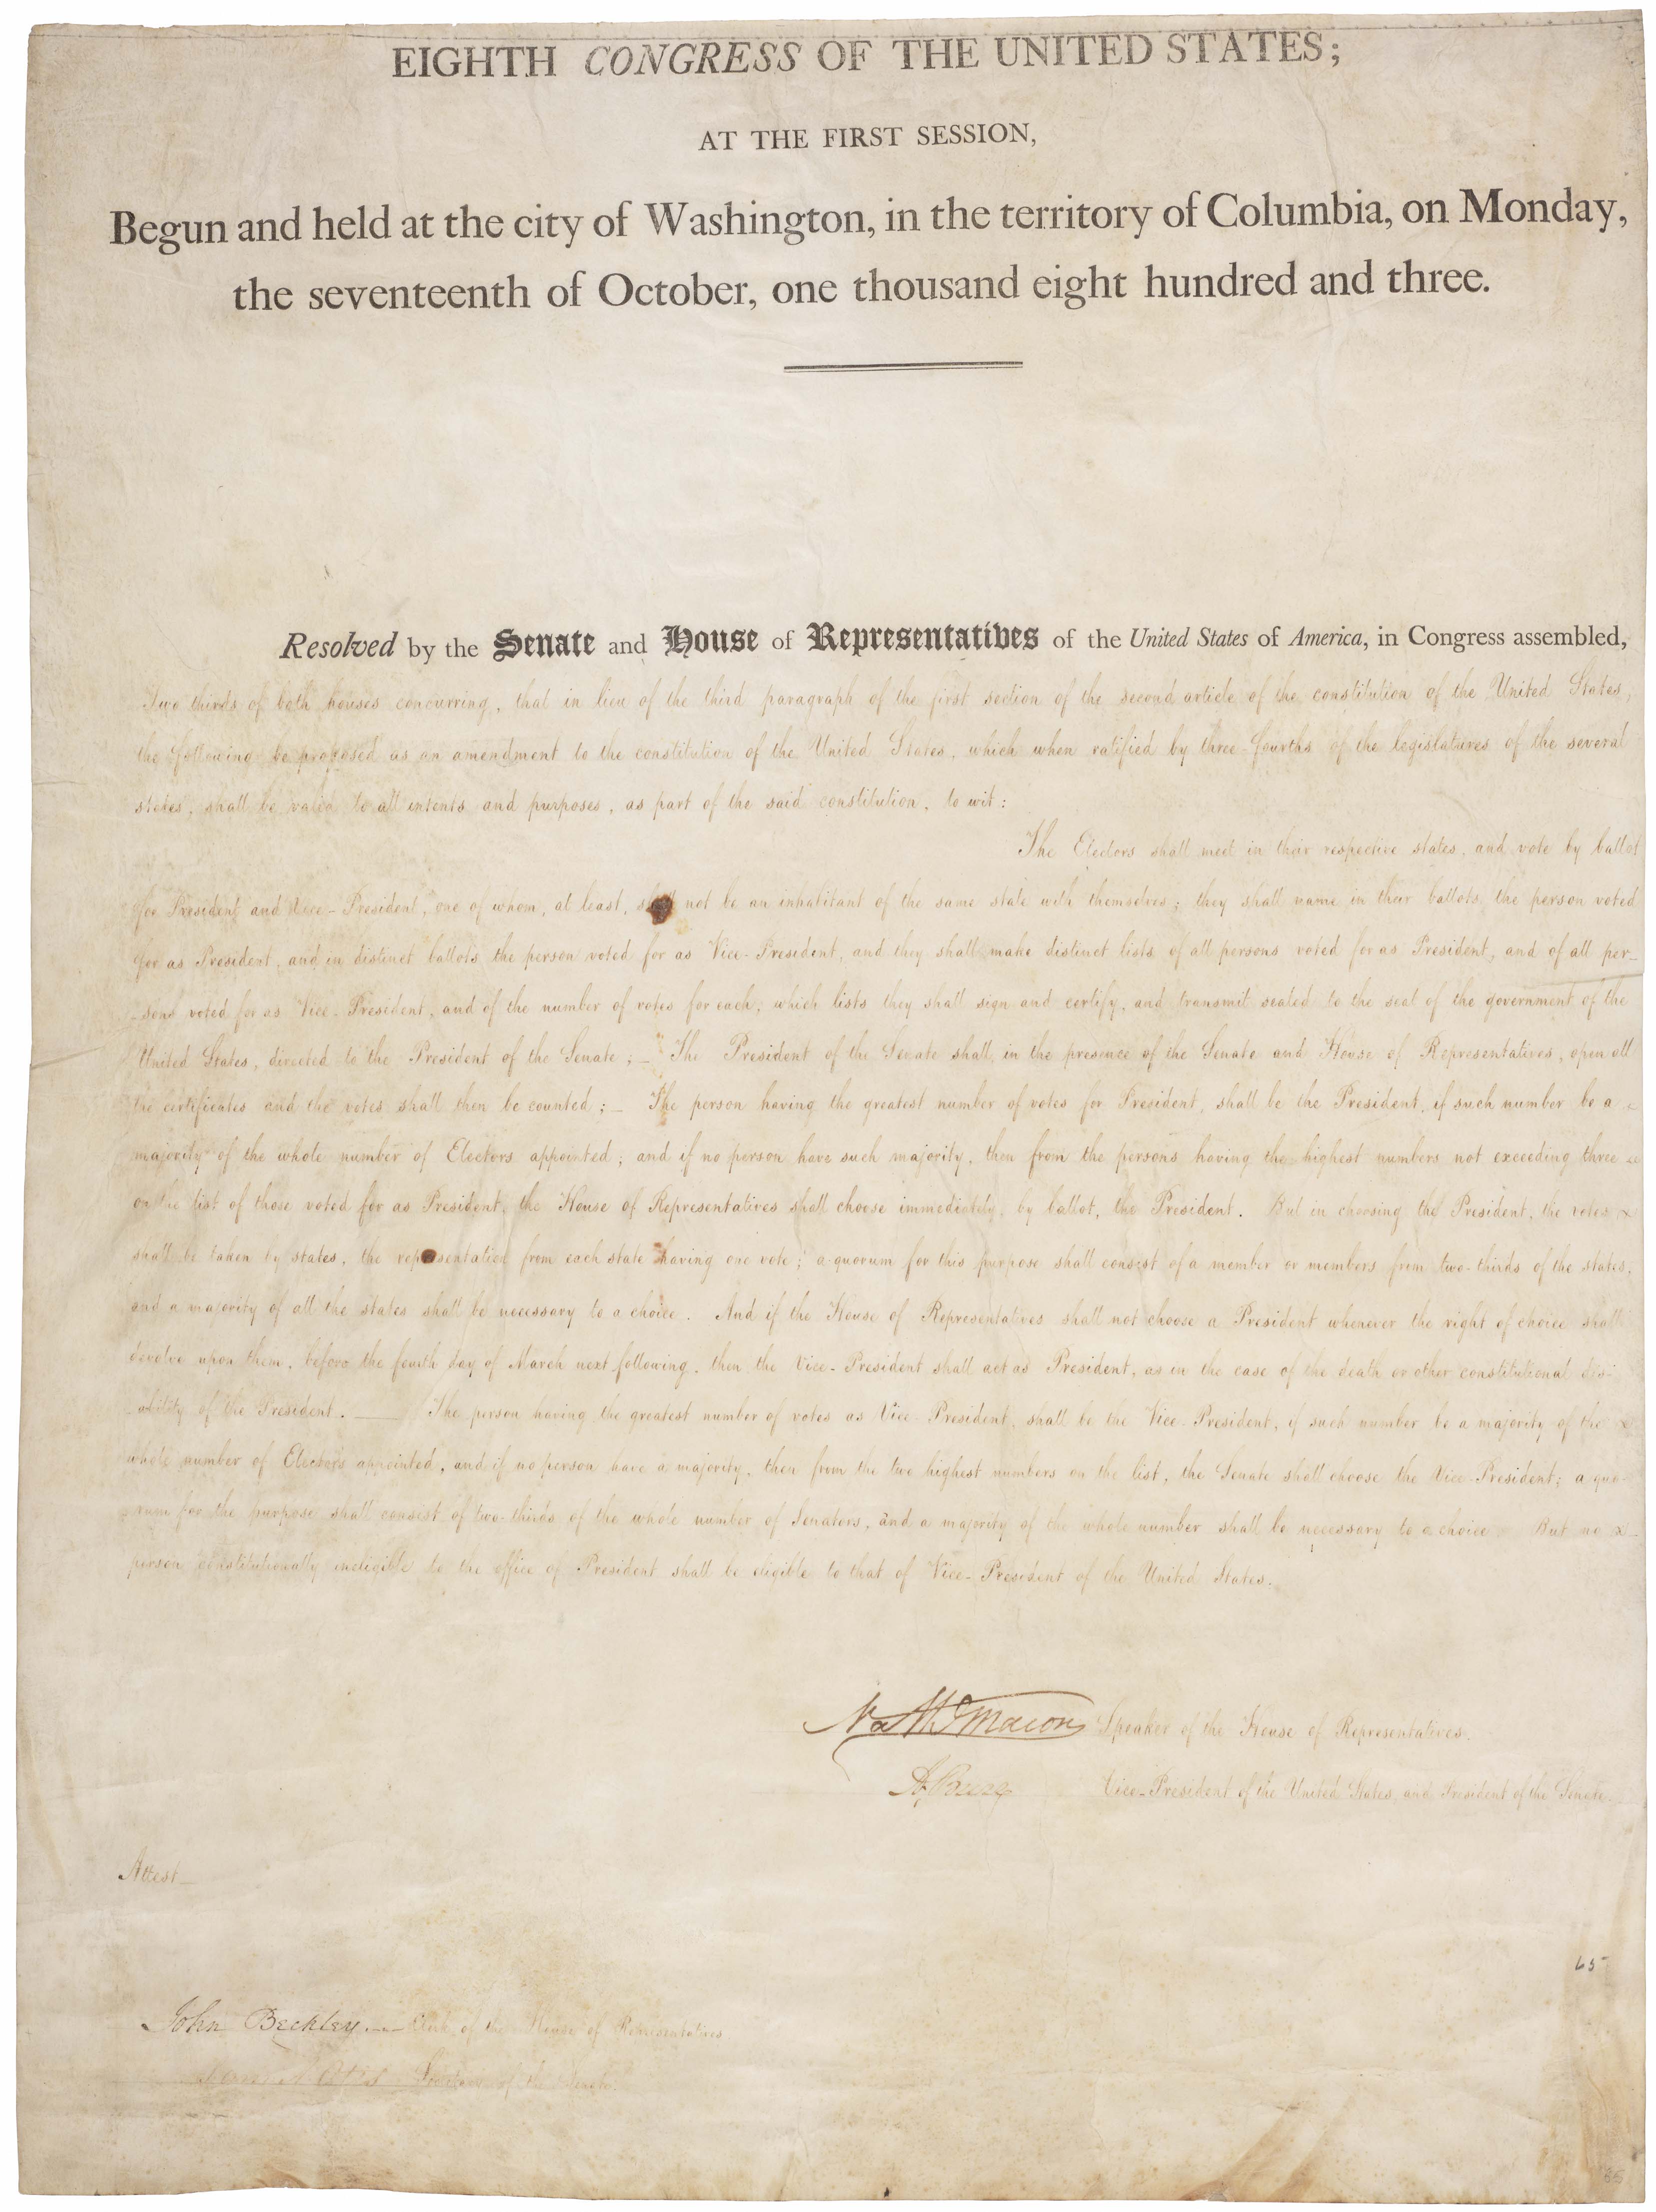 12th Amendment to the US Constitution